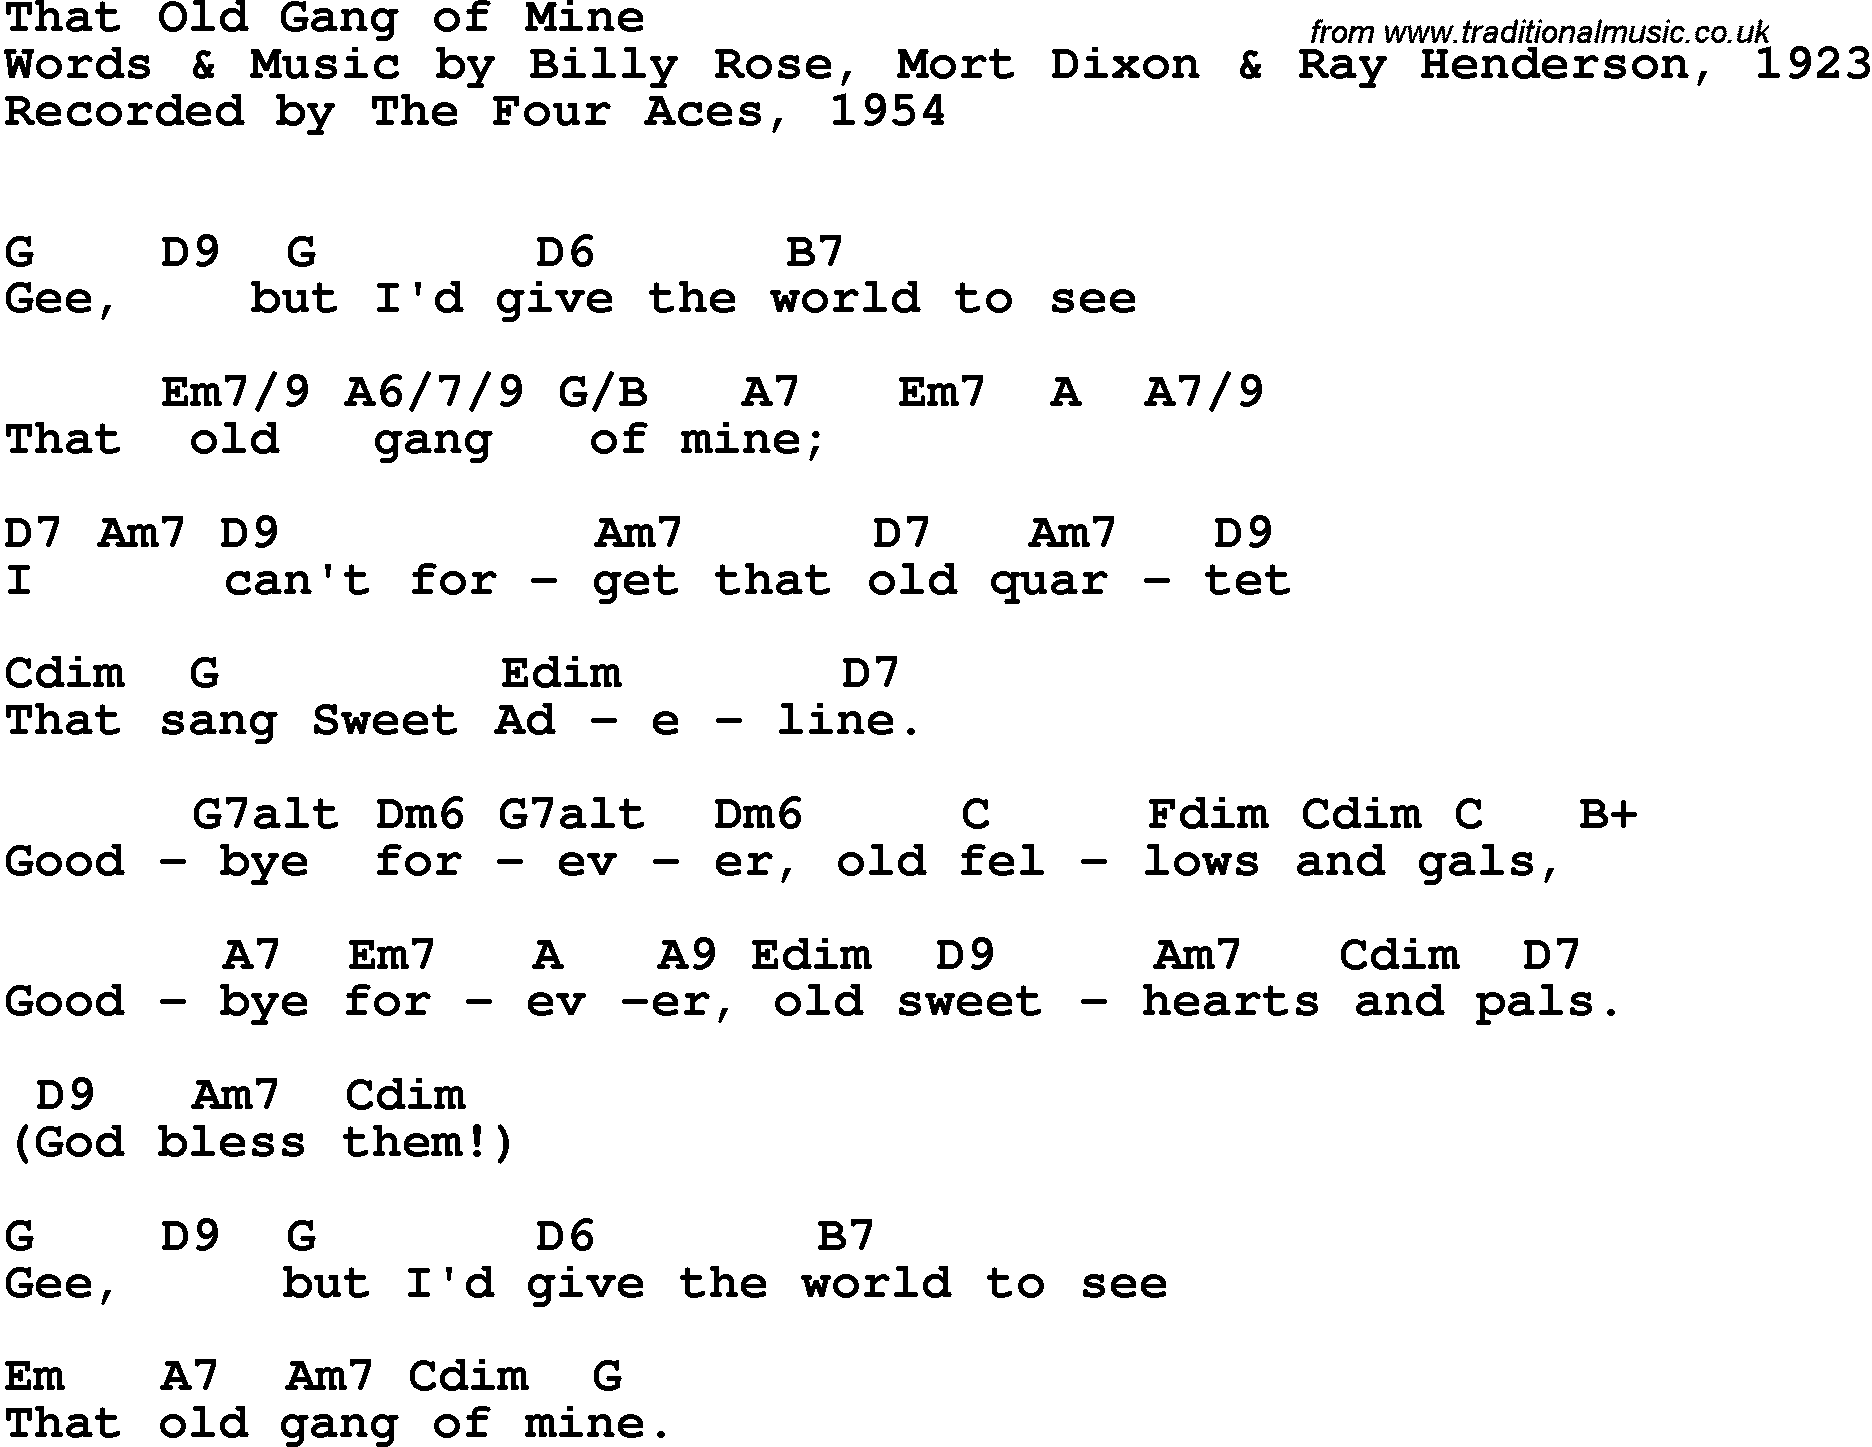 Song Lyrics with guitar chords for That Old Gang Of Mine - The Four Aces, 1954